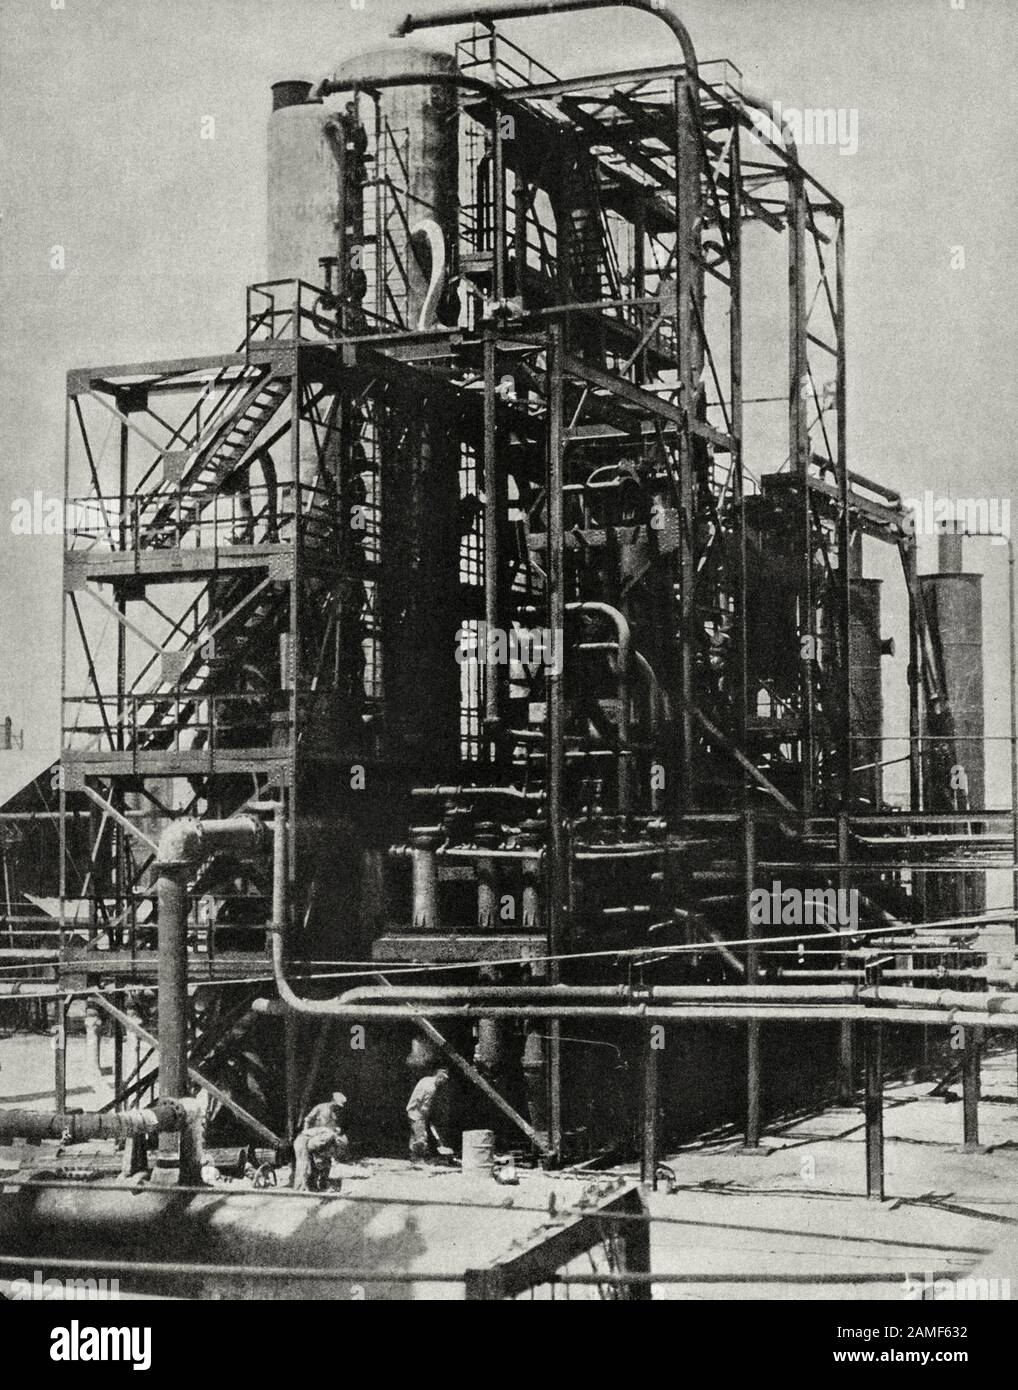 The life in Soviet Union in 1930s. From soviet propaganda book. Photo: Mounting the soviet tubular in Baku. The young oil machine-building industries Stock Photo